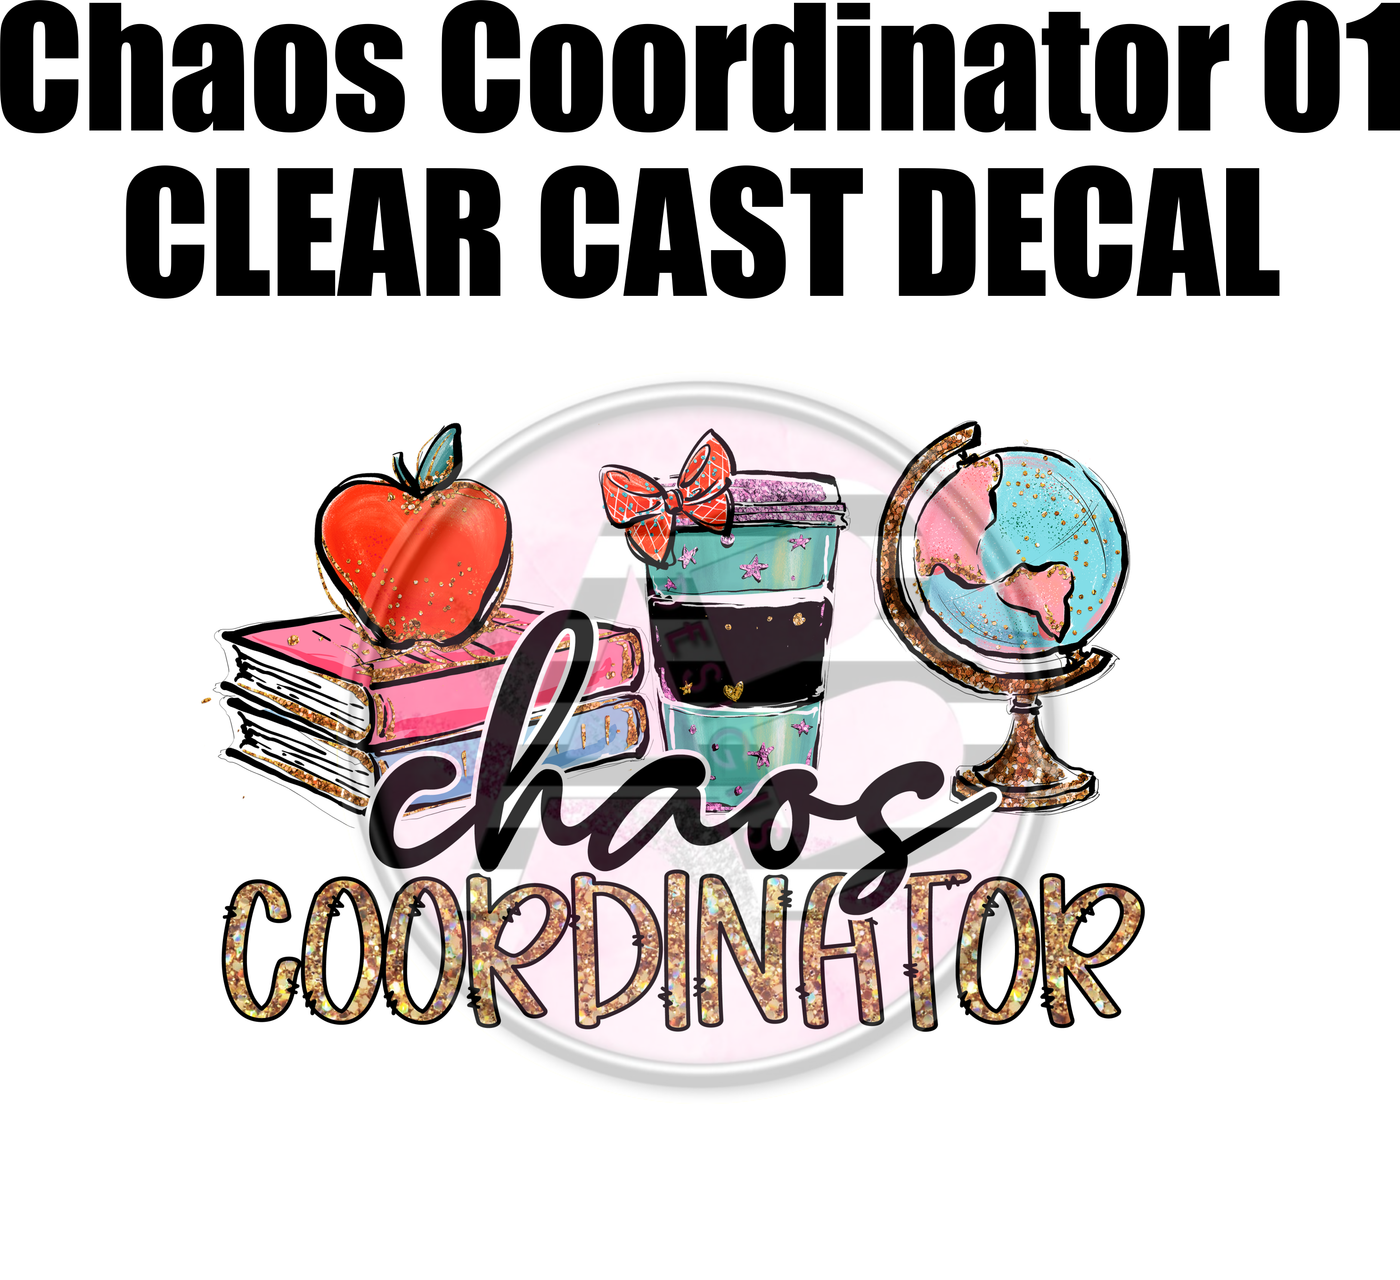 Chaos Coordinator 01 - Clear Cast Decal